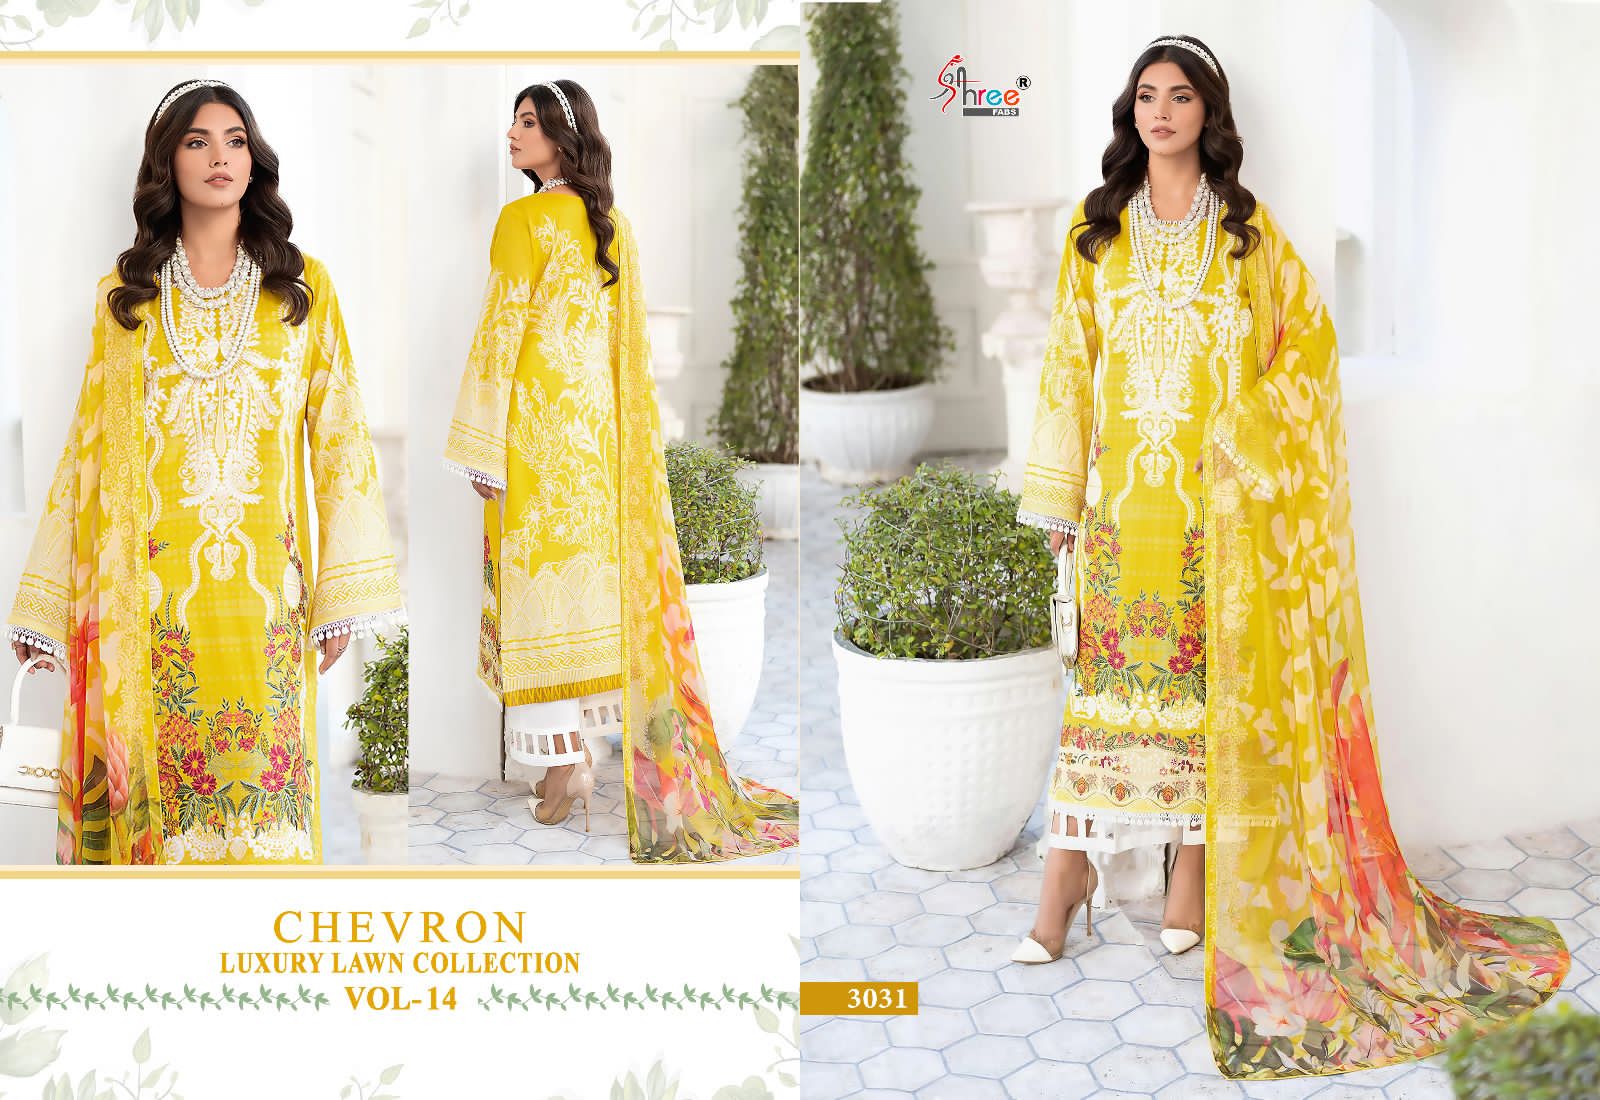 Shree Chevron Luxury Lawn Collection Vol 14 collection 5